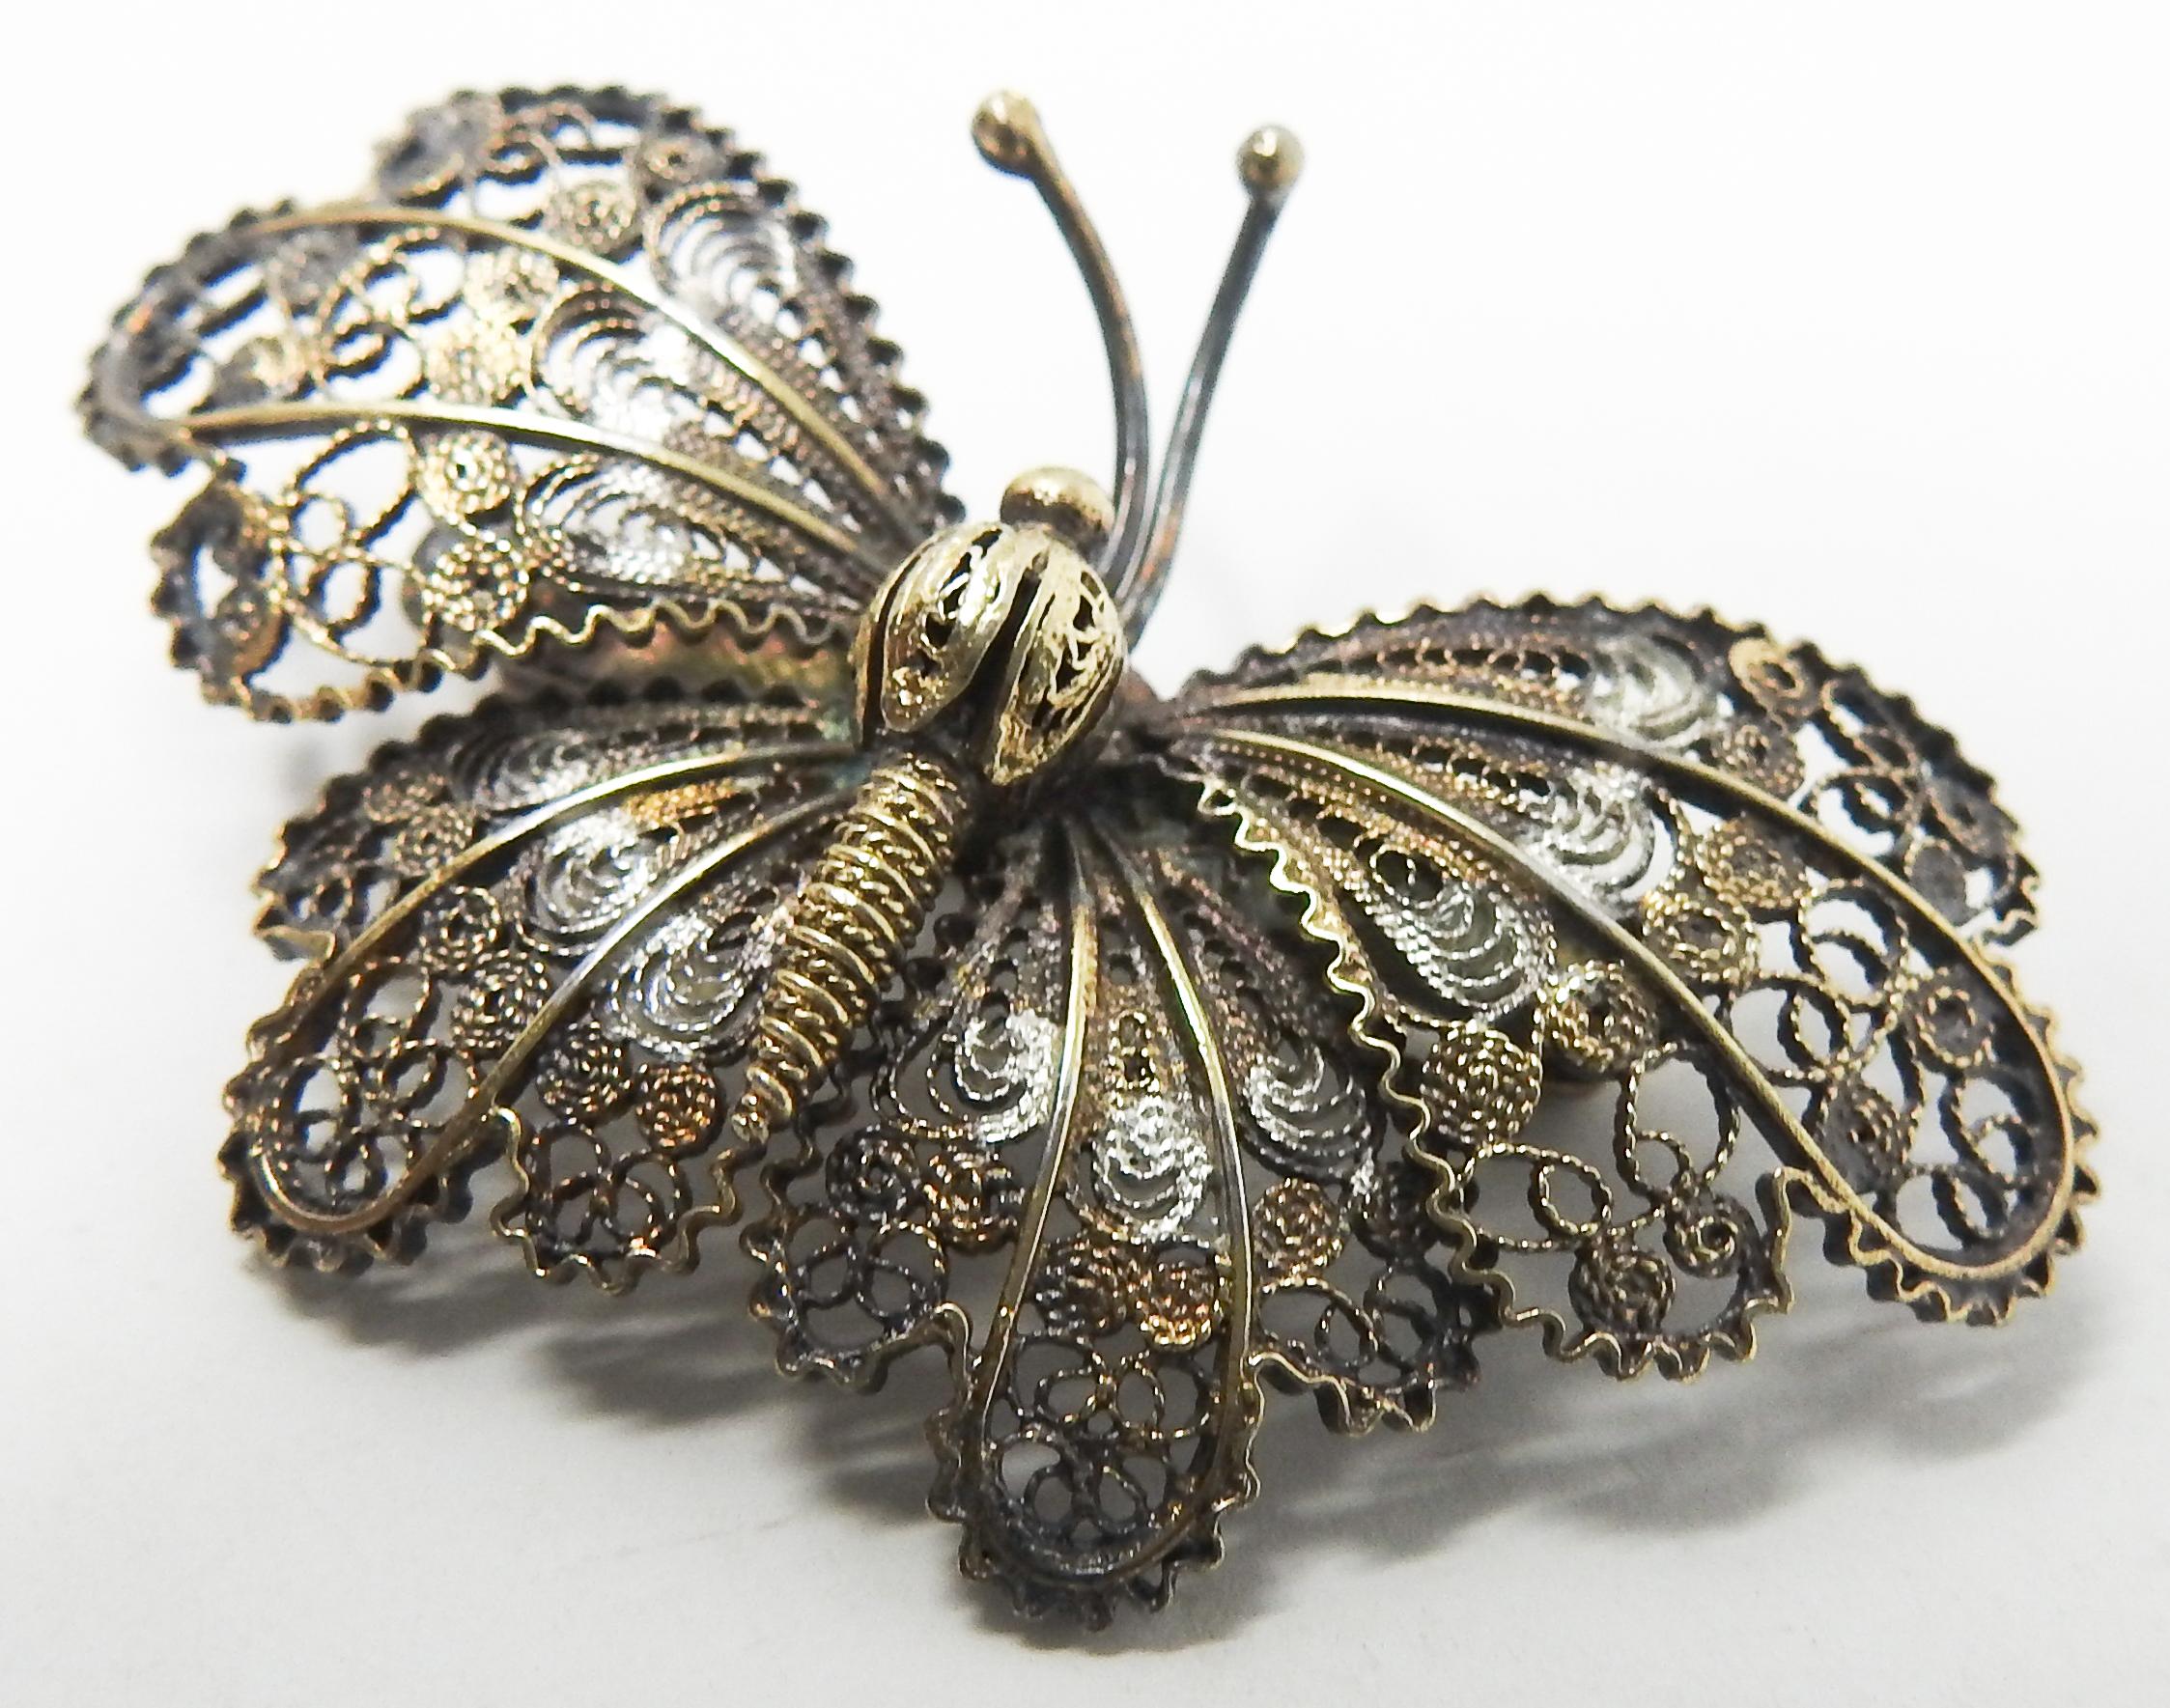 Offering this gorgeous sterling silver and gold filigree butterfly brooch. All the filigree is handcrafted and done in beautiful patterns. The back of the pin is marked Sterling on the pin. No makers mark is visible.